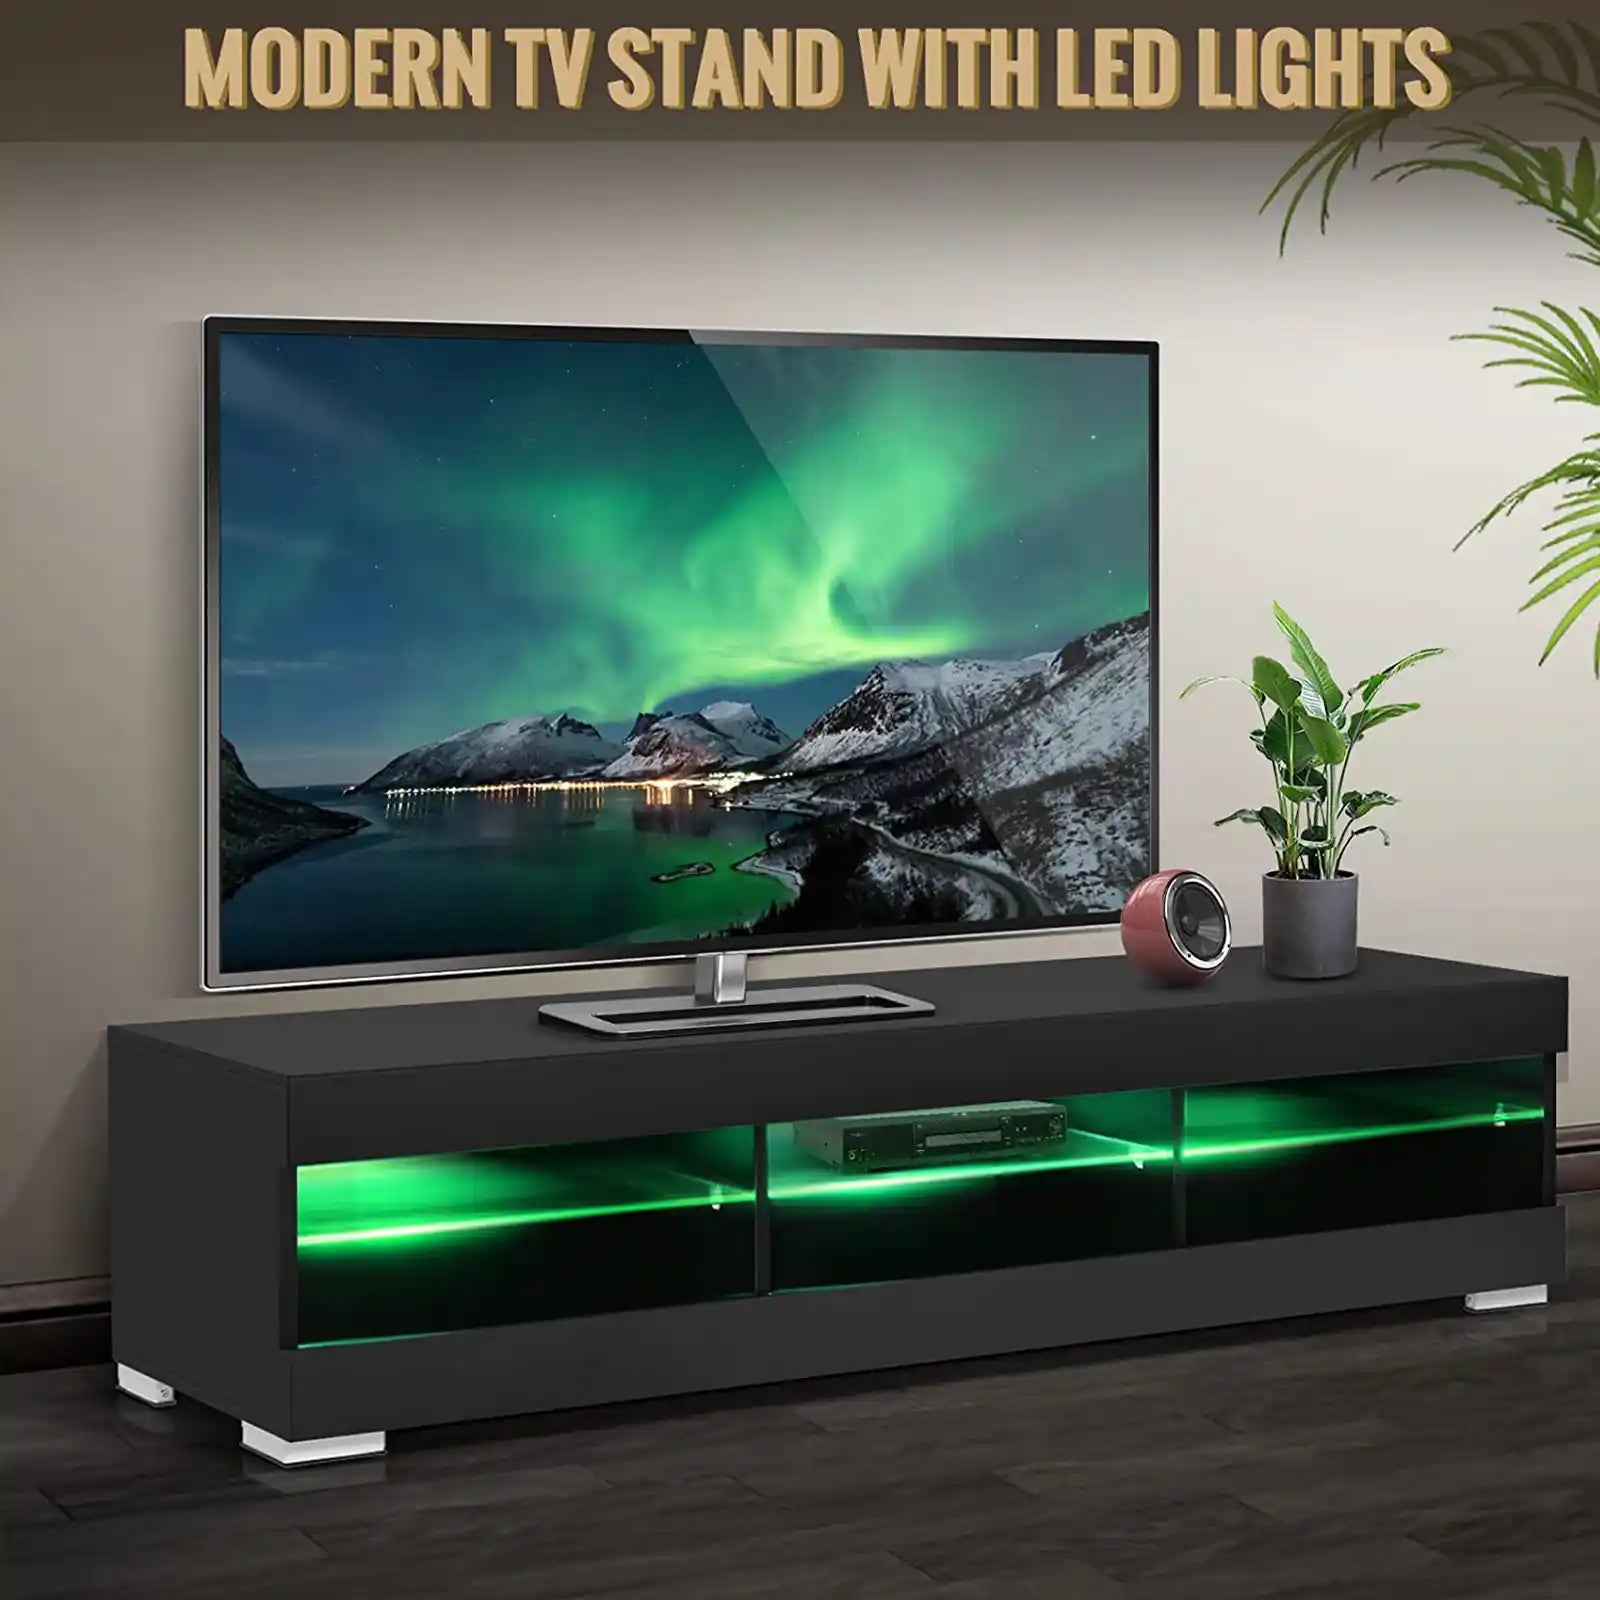 LED TV Stand with LED Lights for 65 inch TV Modern Entertainment Center with Storage